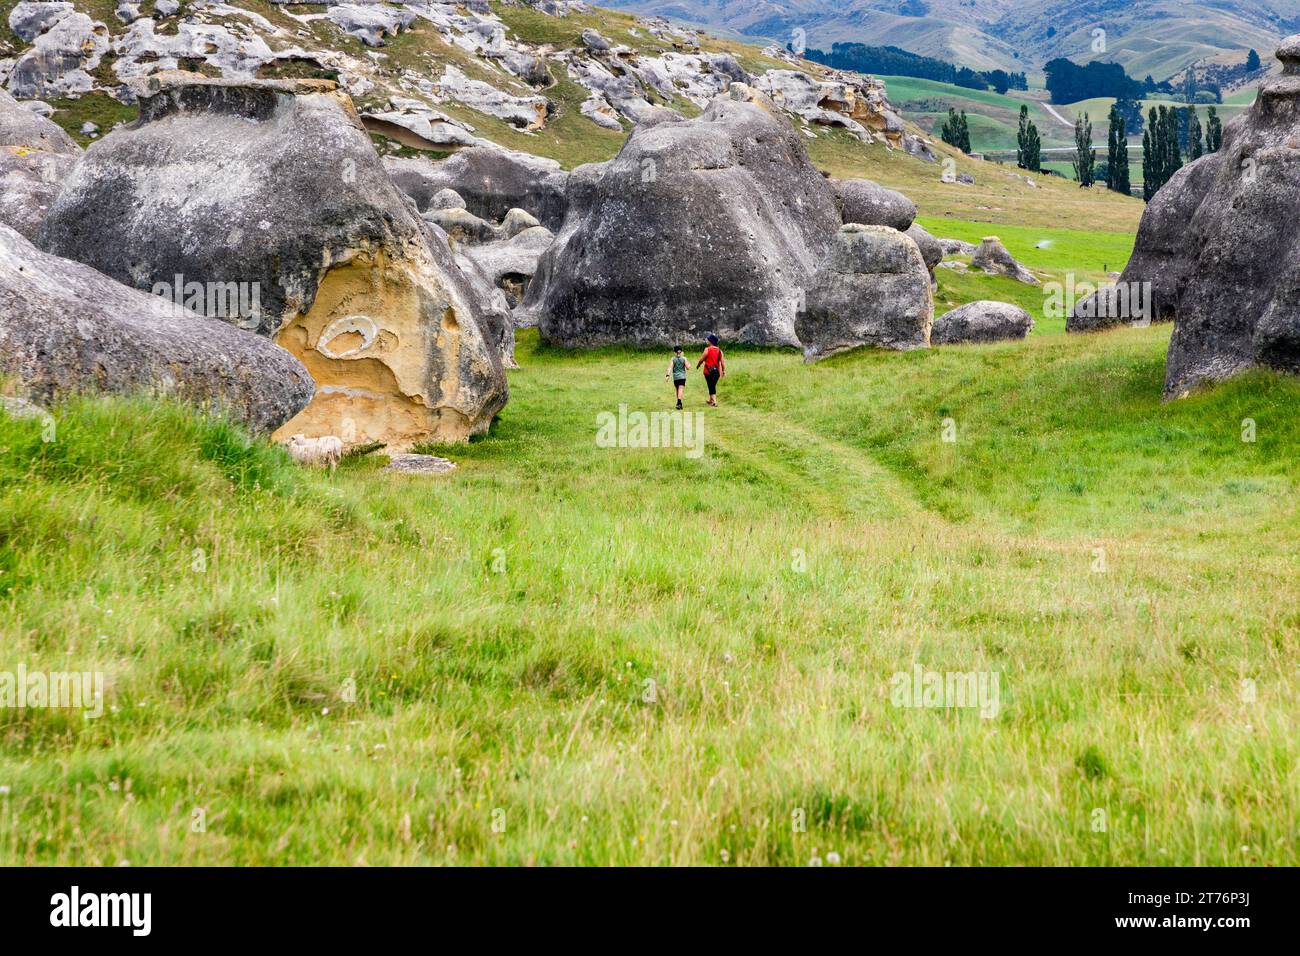 The Elephant Rocks near Duntroon in North Otago, New Zealand, are a collection of large weathered limestone rocks. The wider area around Duntroon is k Stock Photo